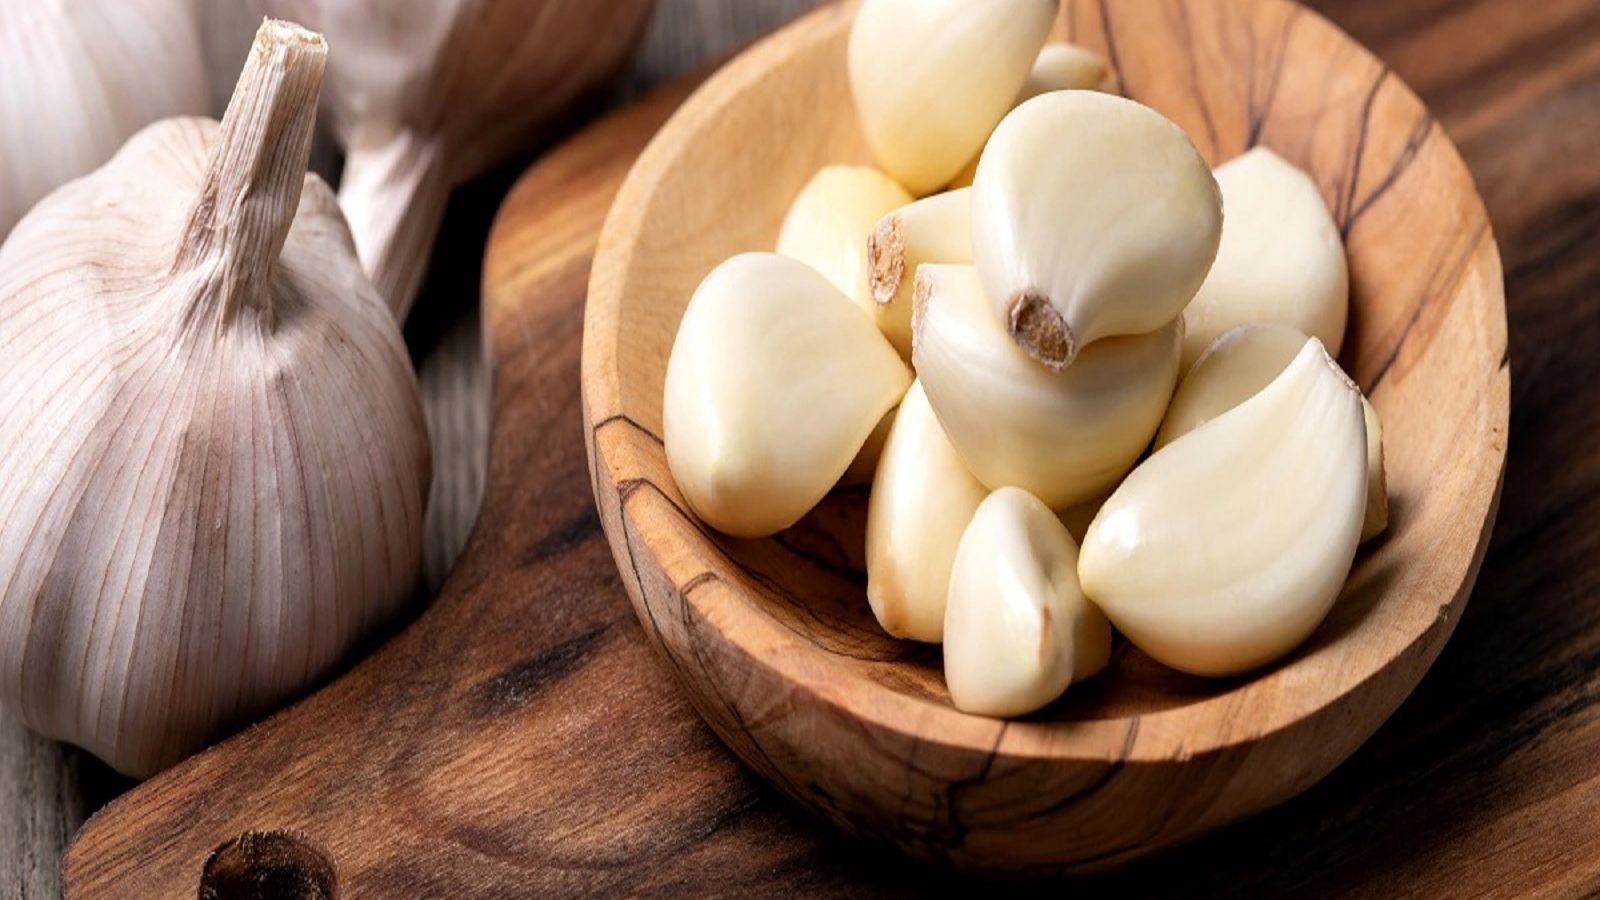 Aspect Results of Garlic: In case you eat extra garlic then be alert, it could be dangerous